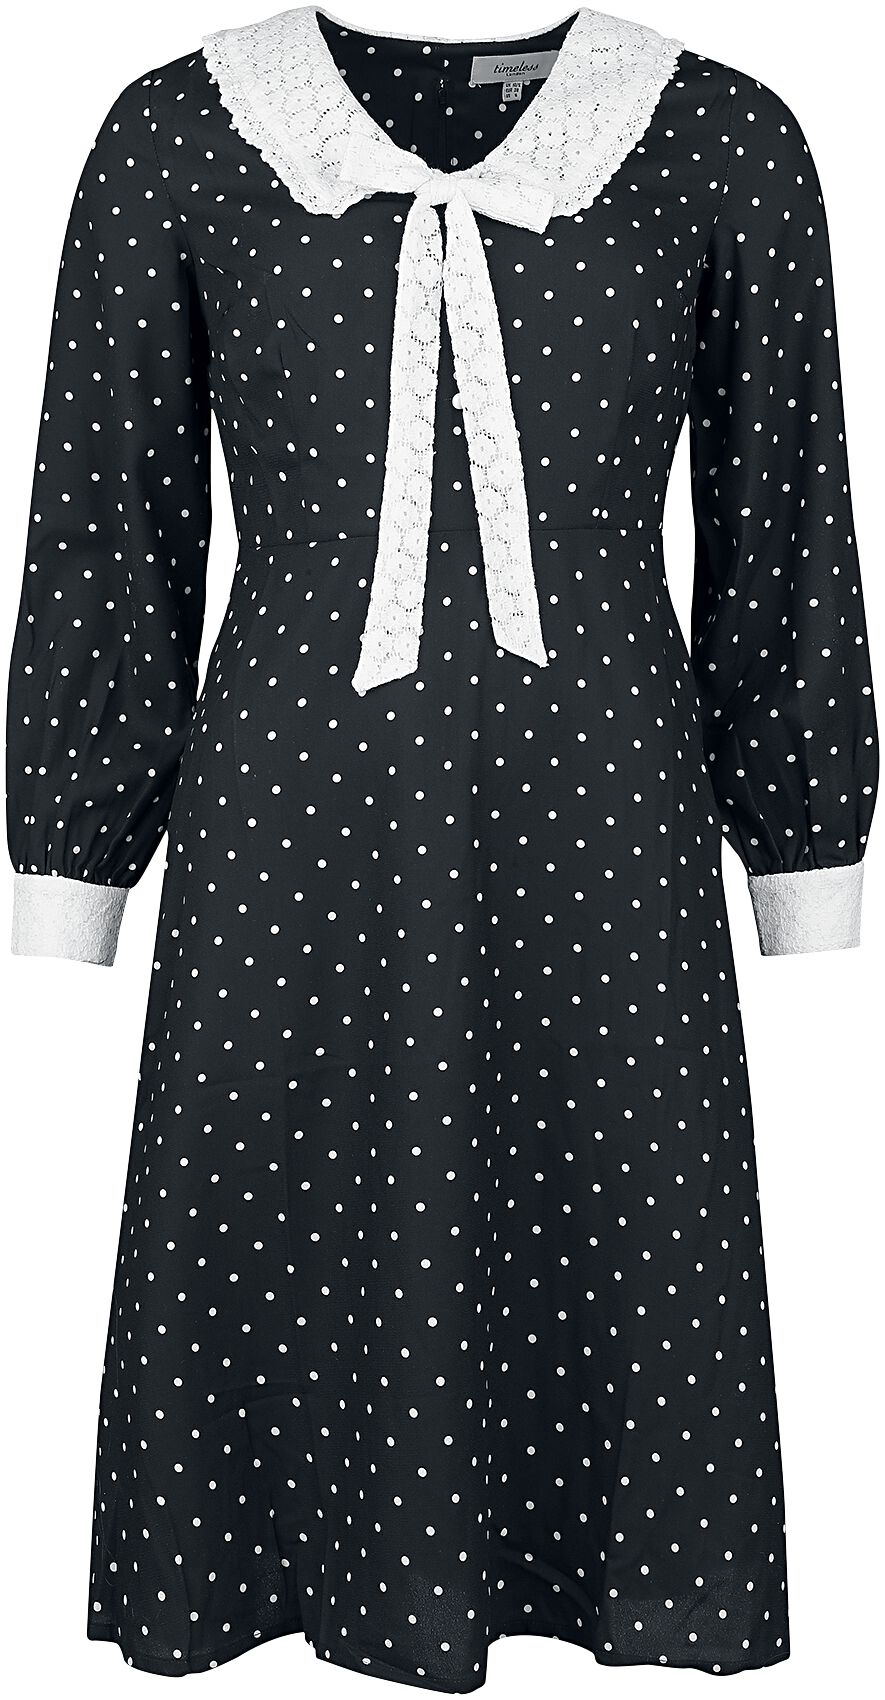 Image of Abito media lunghezza Rockabilly di Timeless London - Bow-front dress - XS a L - Donna - nero/bianco